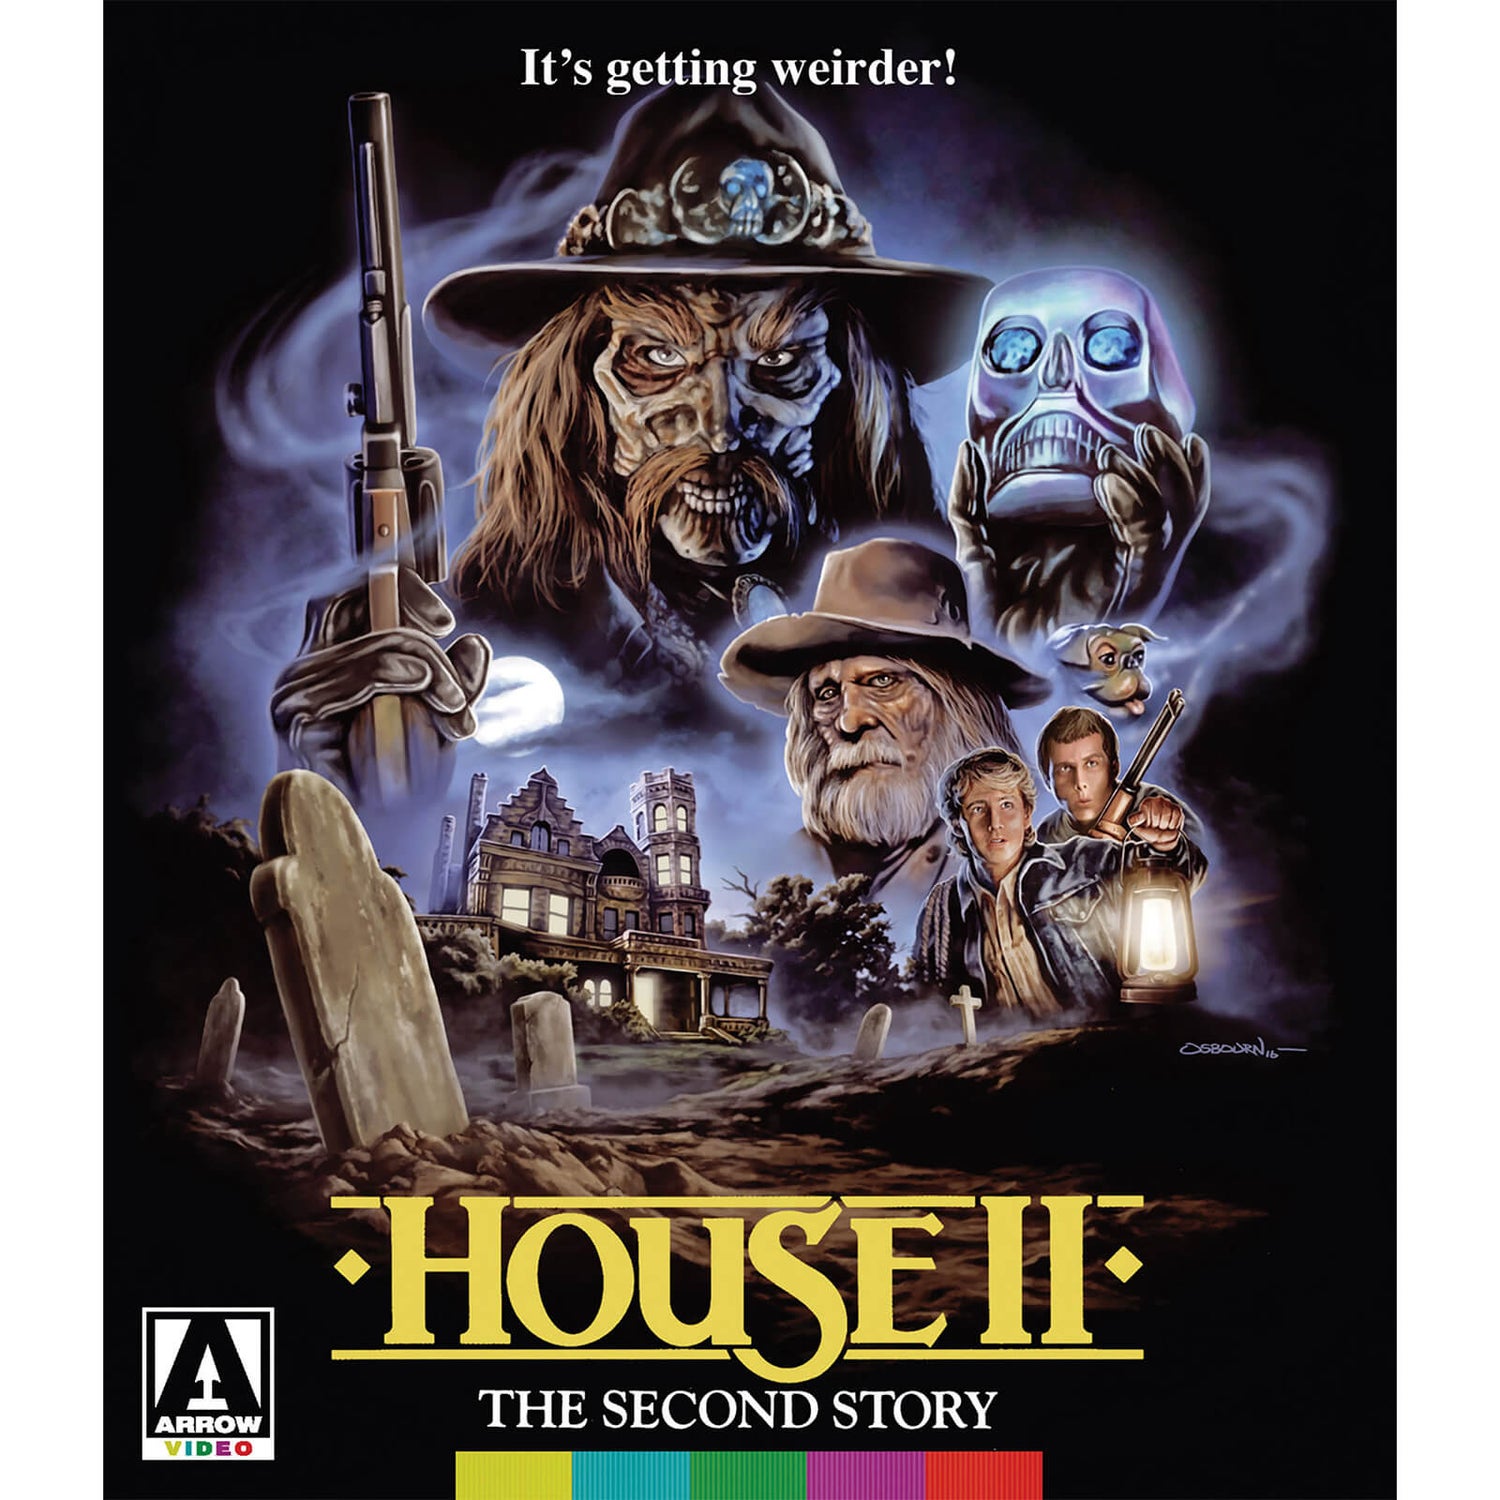 House II: The Second Story Blu-ray